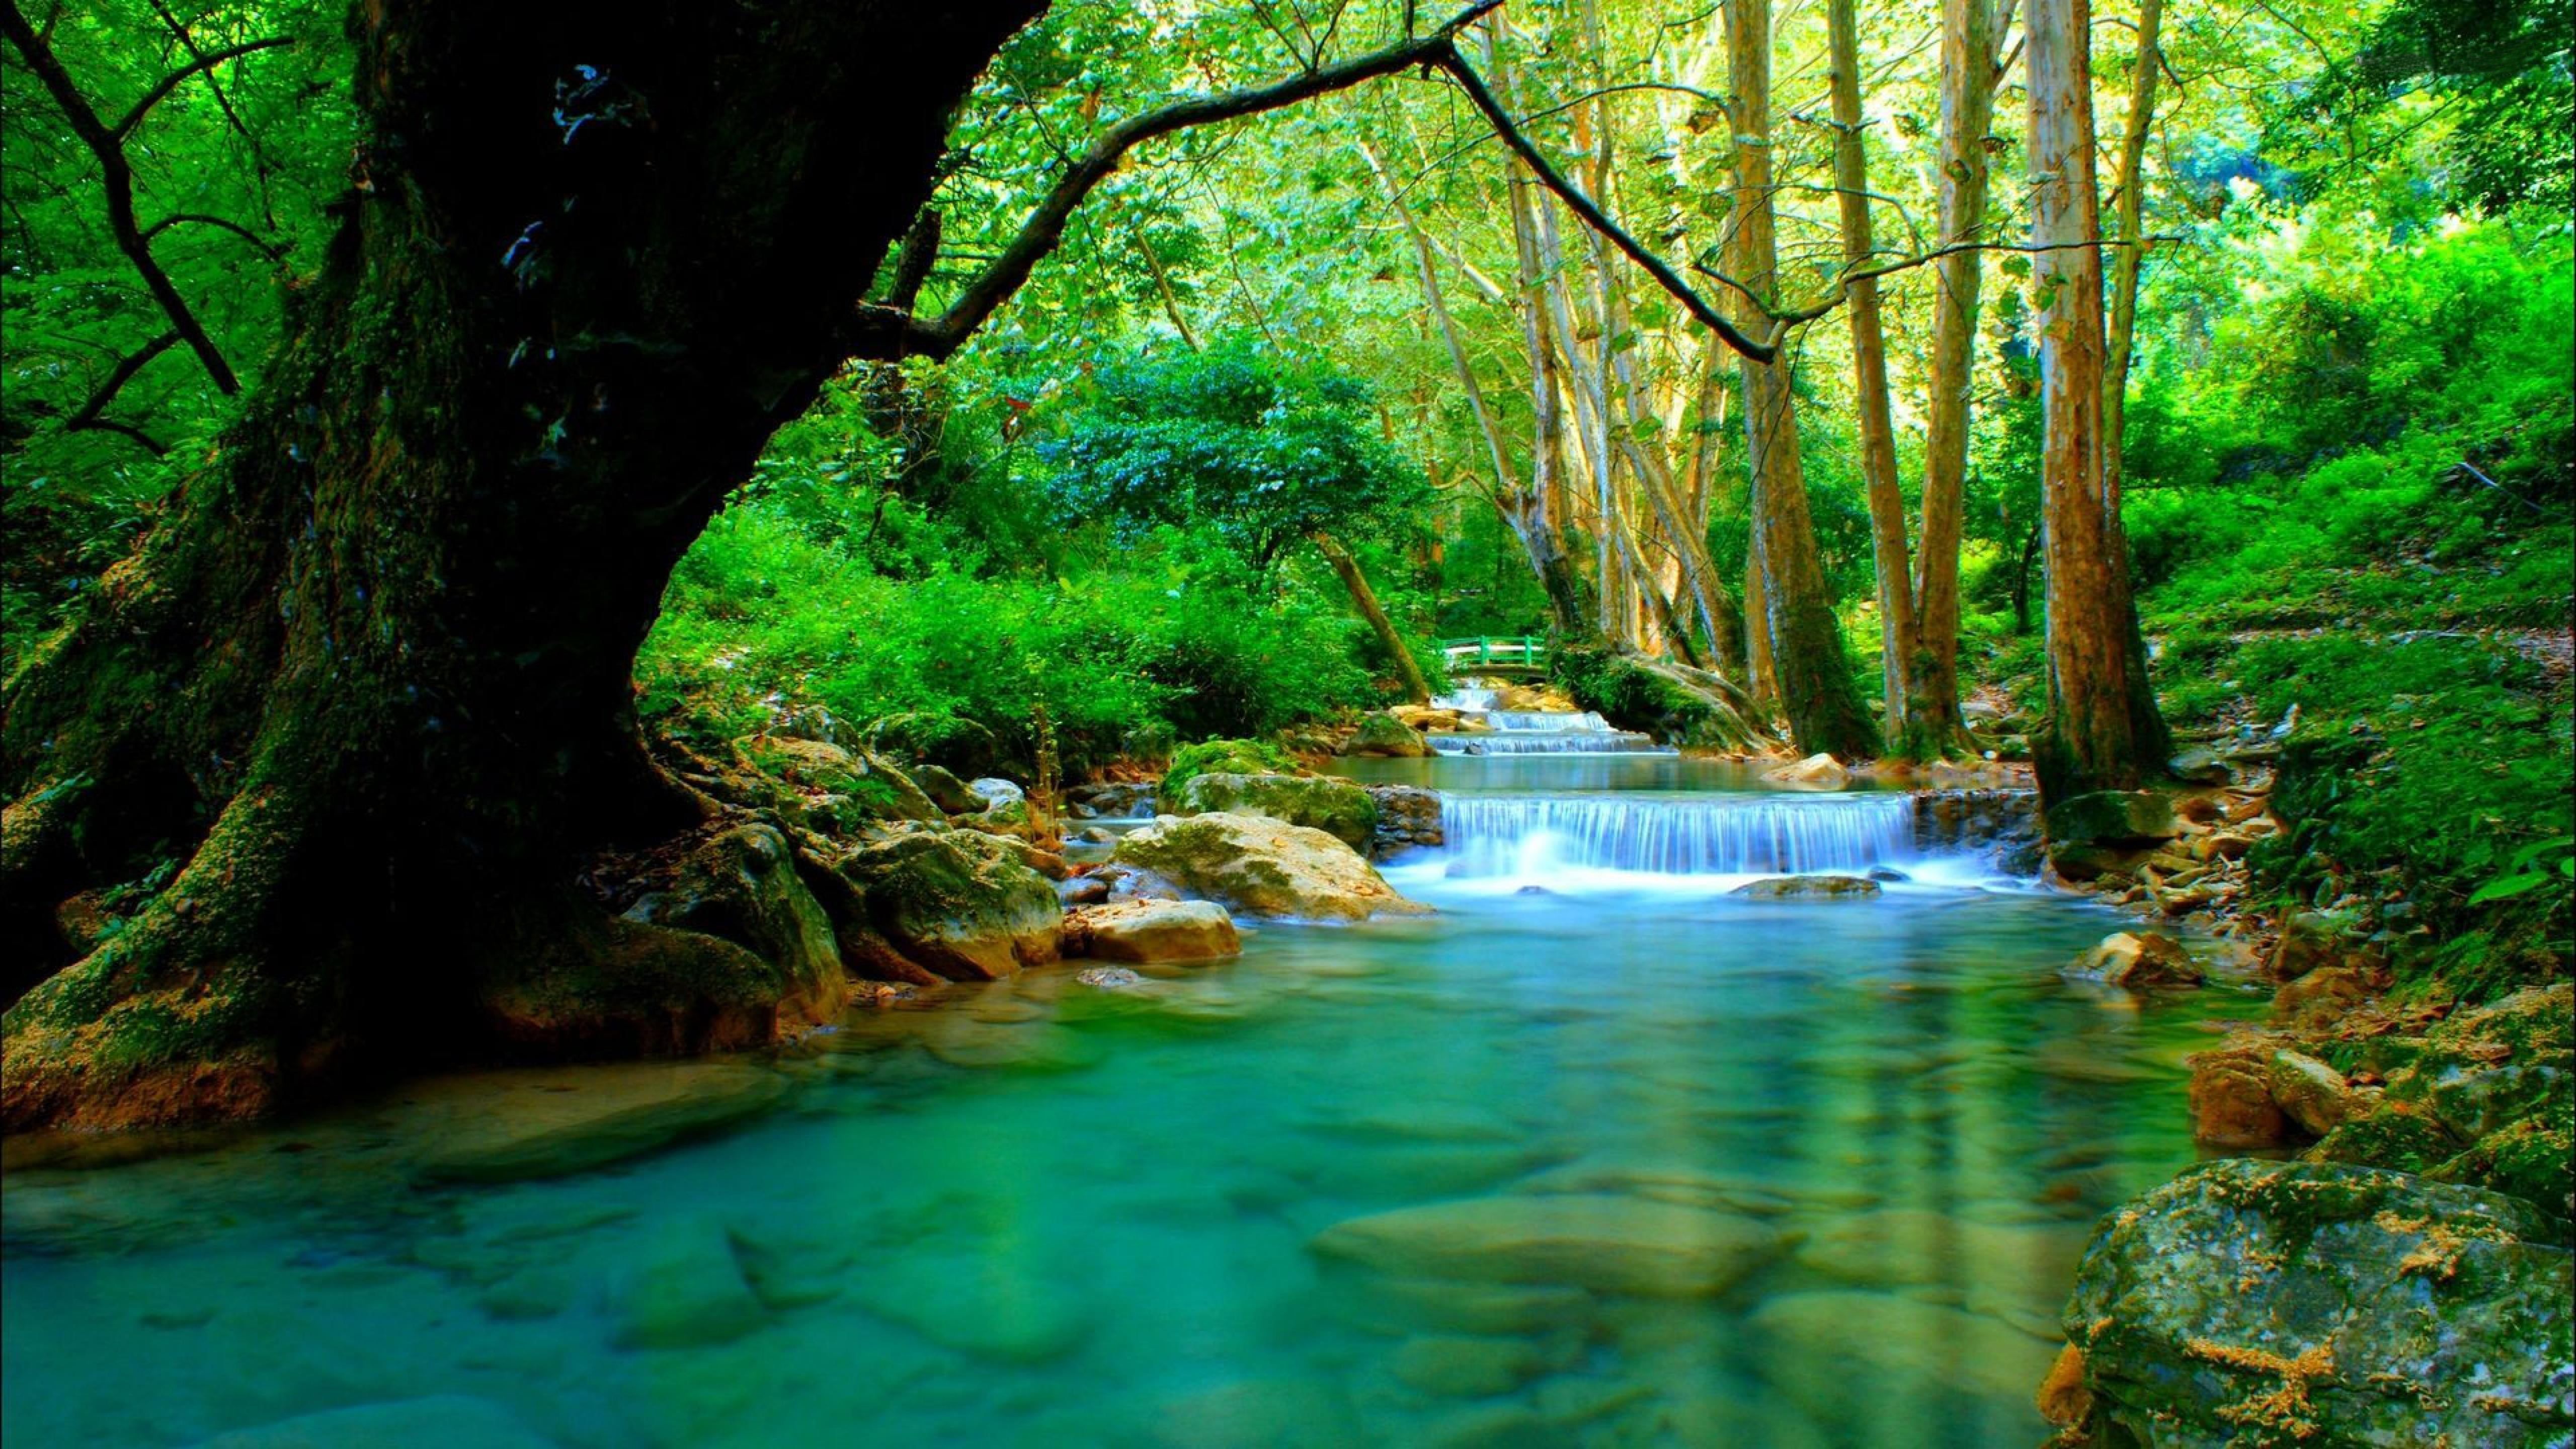 Forest River With Cascades Turquoise Water Rocks Trees Desktop Wallpaper HD For Mobile Phones And Laptops 5120×28. Beautiful Forest, Tree Desktop Wallpaper, River